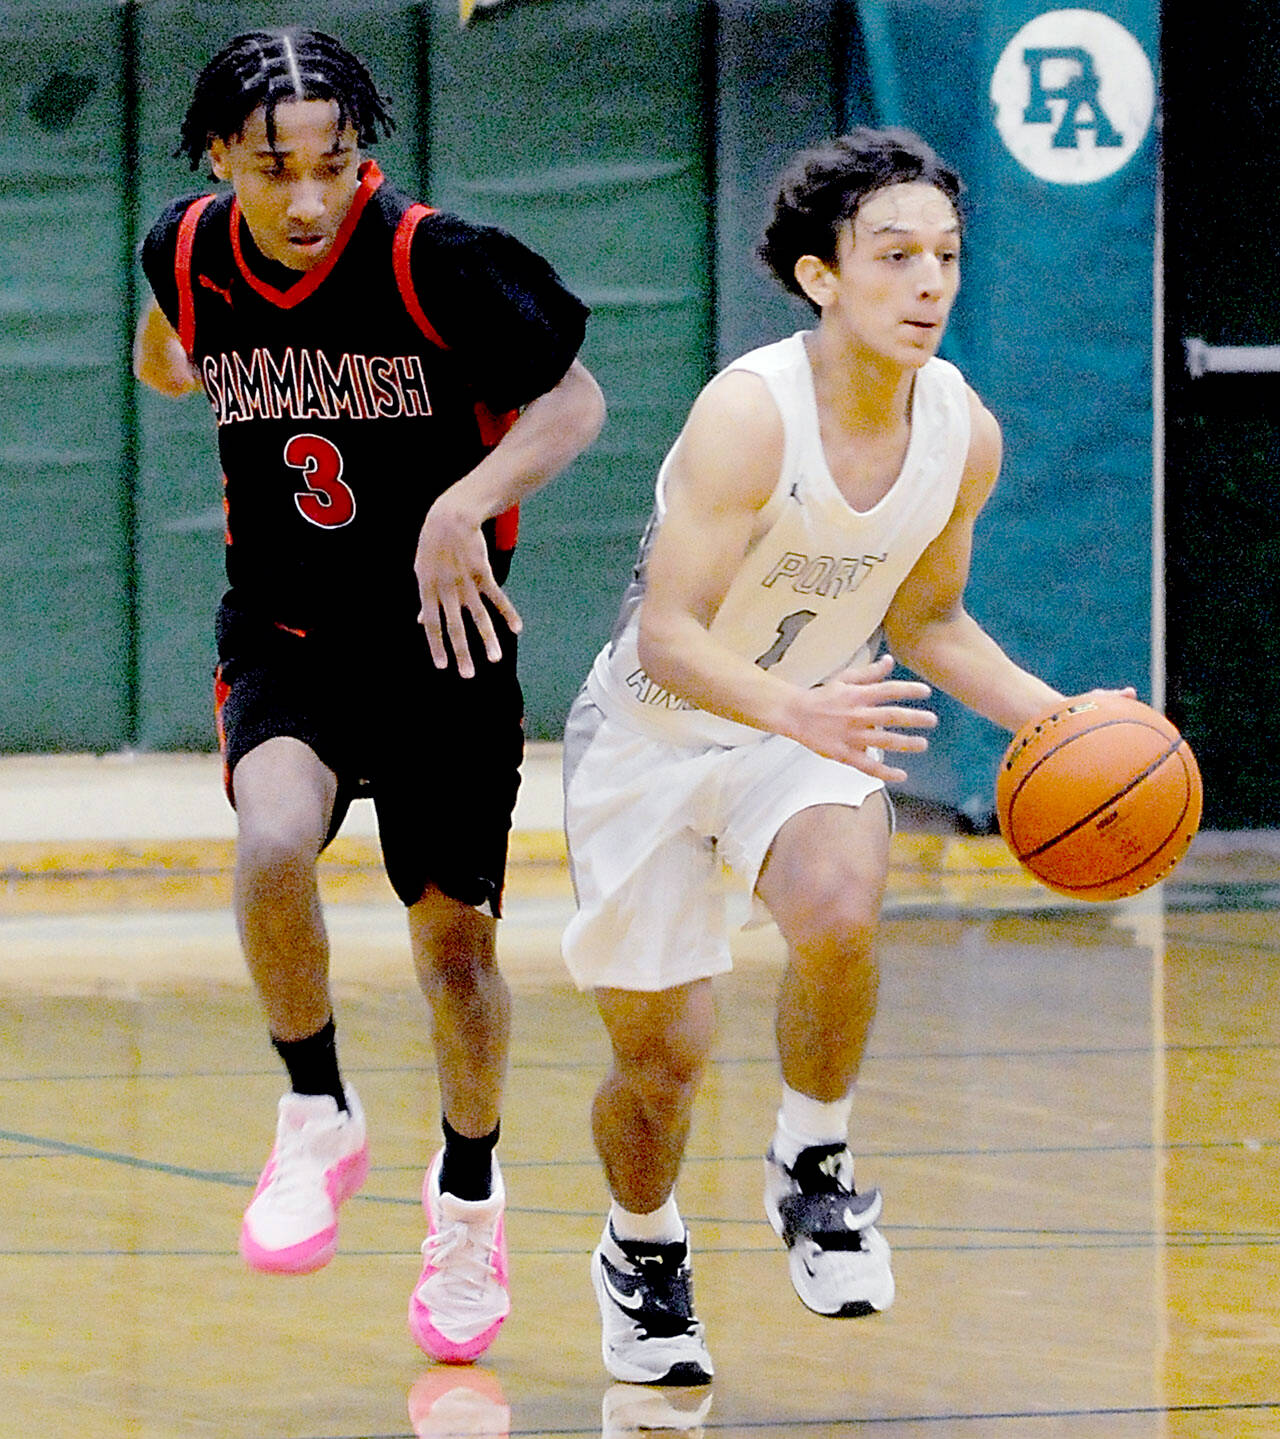 Port Angeles’ Kason Albaugh, right, moves the ball as Sammamish’s Anthony Boddie follows along on Wednesday at Port Angeles High School. (Keith Thorpe/Peninsula Daily News)